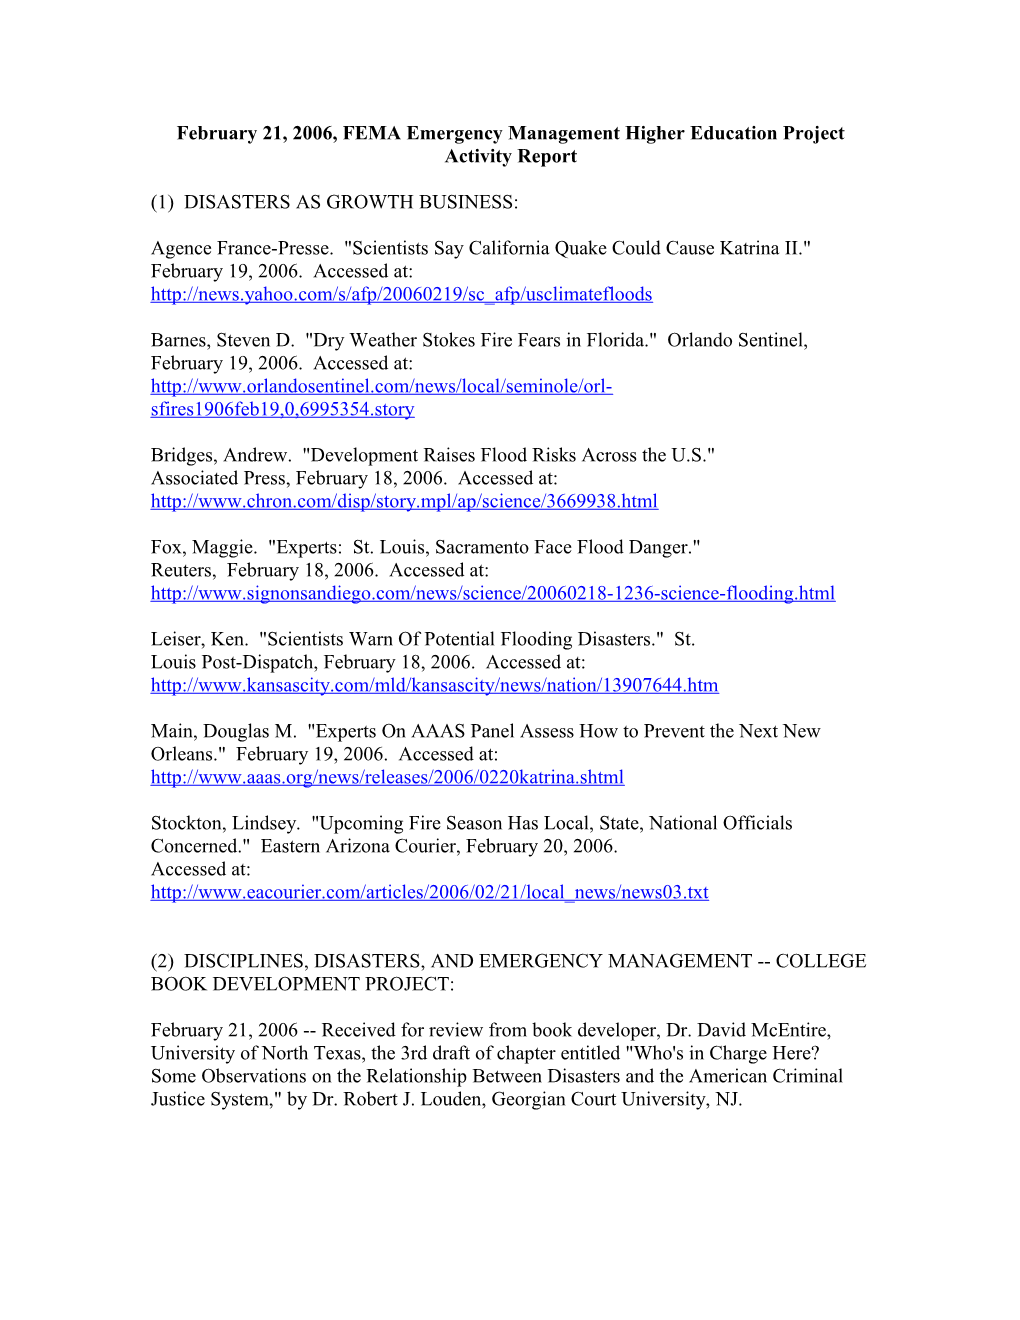 February 21, 2006, FEMA Emergency Management Higher Education Project Activity Report